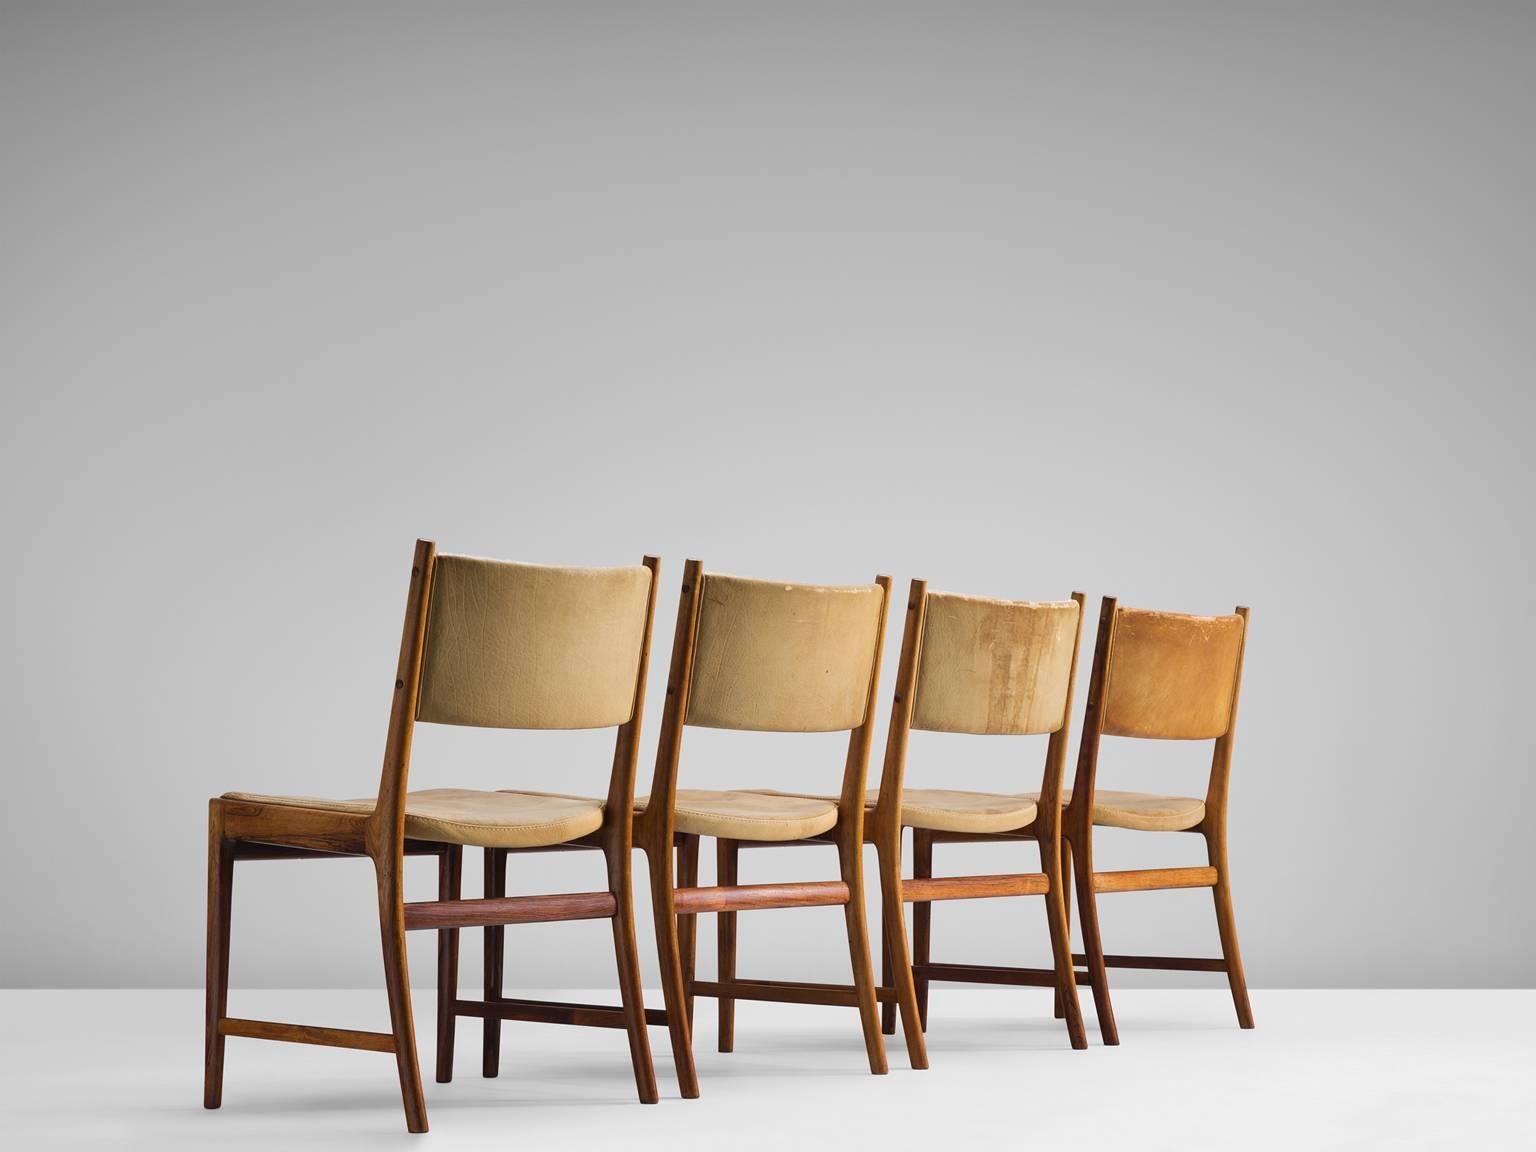 Set of four dining chairs in wood and cognac leather, by Kai Lyngfeldt Larsen, Denmark, 1960s.

These comfortable dining chairs show wonderful craftsmanship. The original pale cognac leather upholstery has aged in a beautiful way. The angular frame